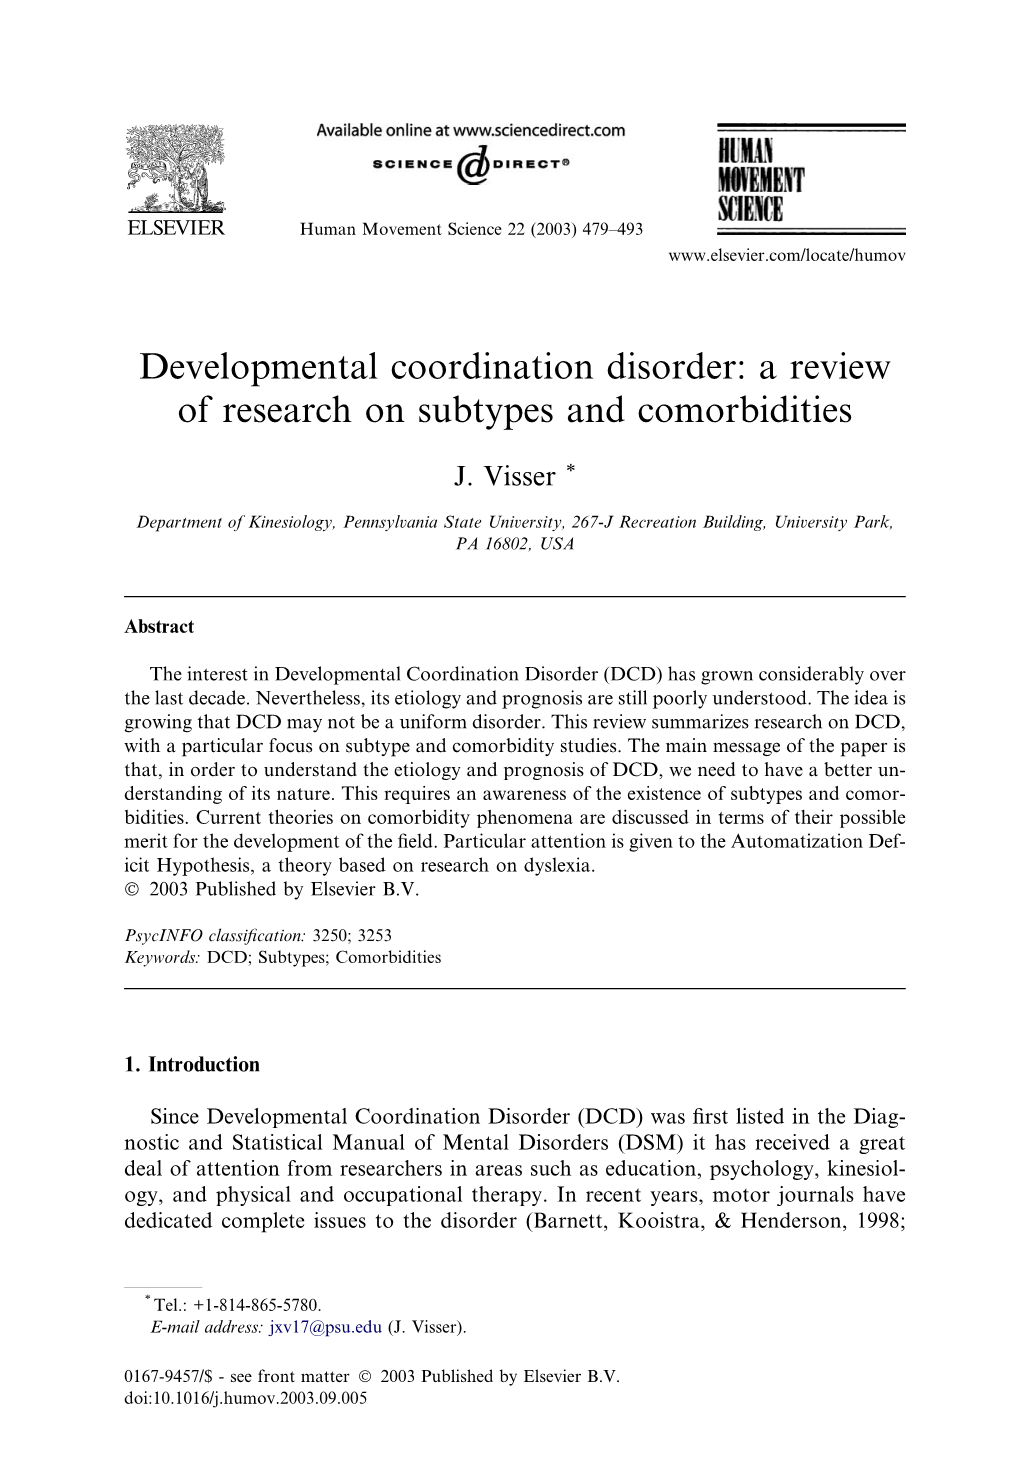 Developmental Coordination Disorder: a Review of Research on Subtypes and Comorbidities